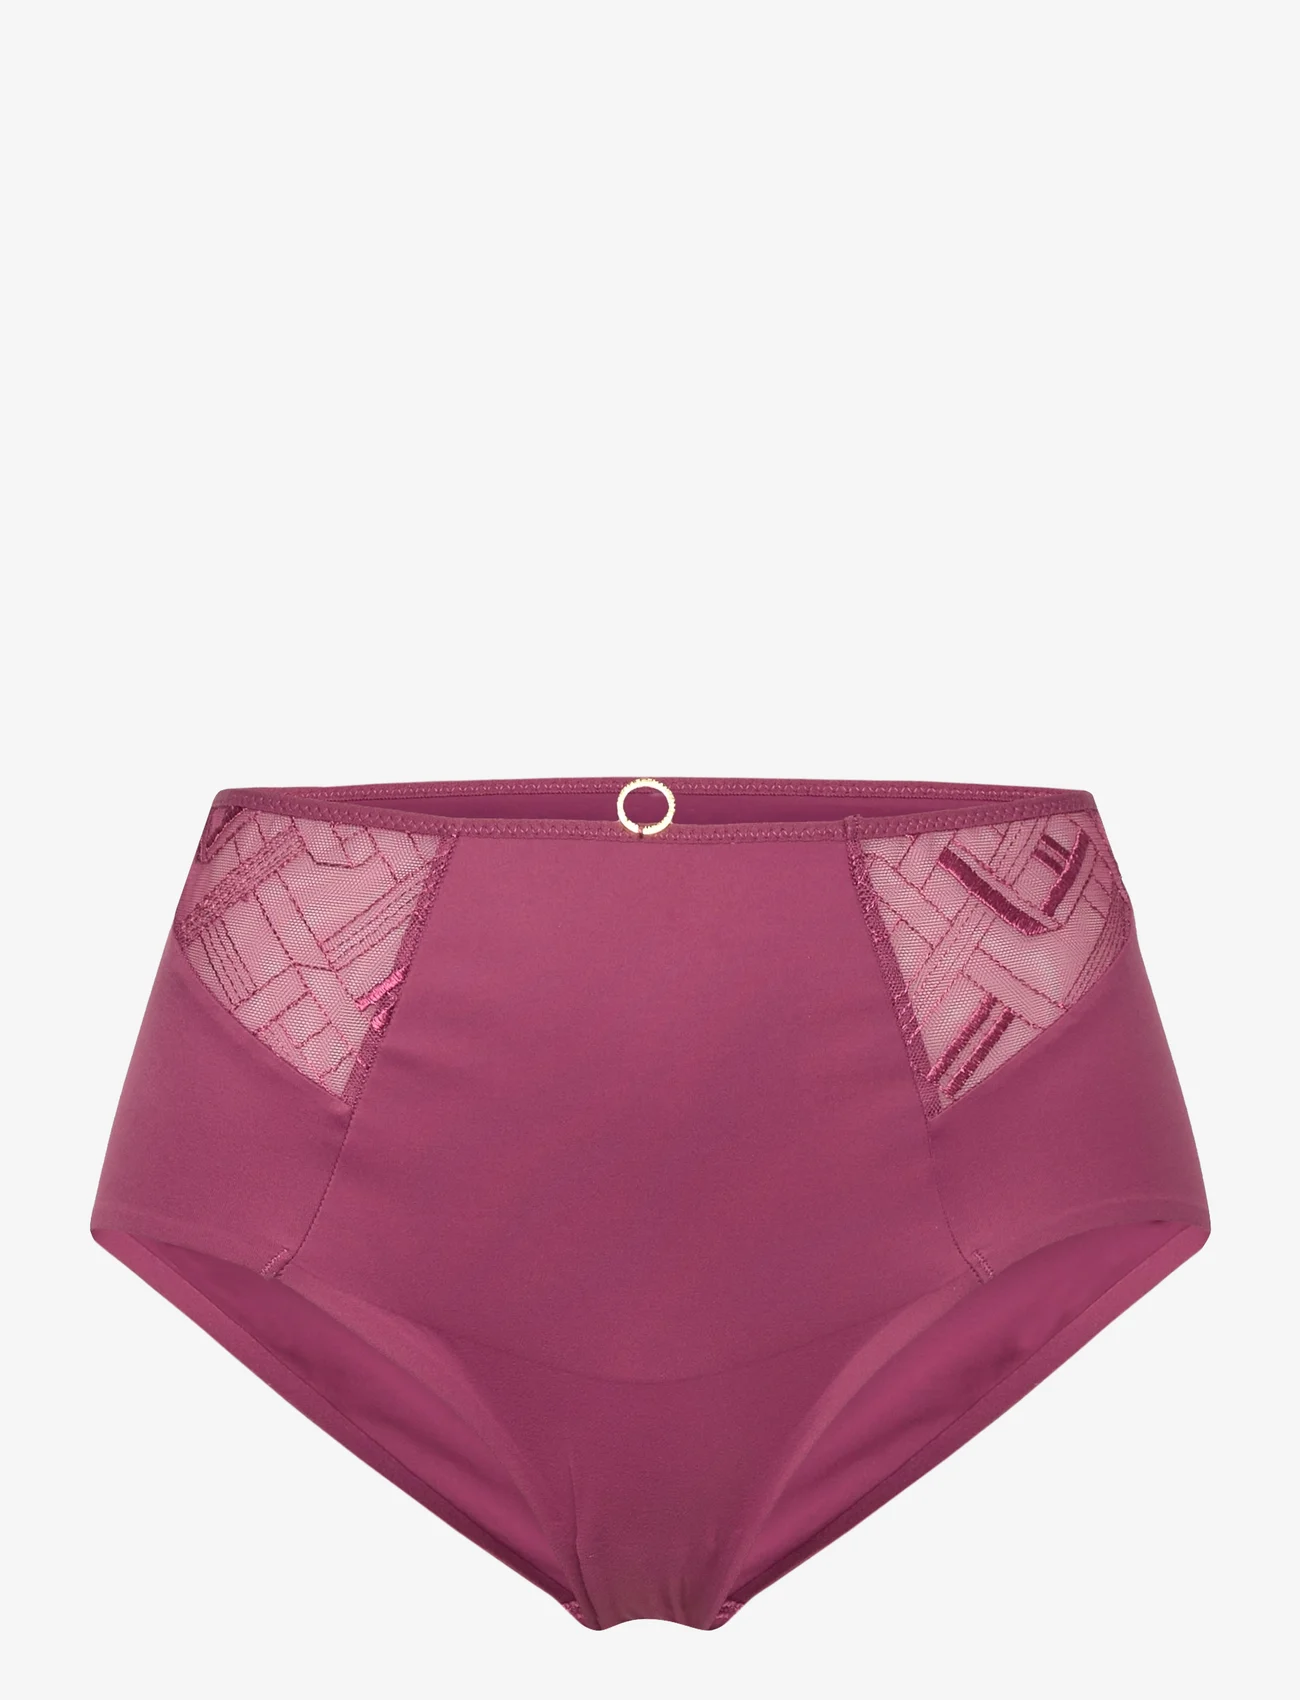 CHANTELLE - Graphic Support High-Waisted Support Brief - trosor - tannin - 0